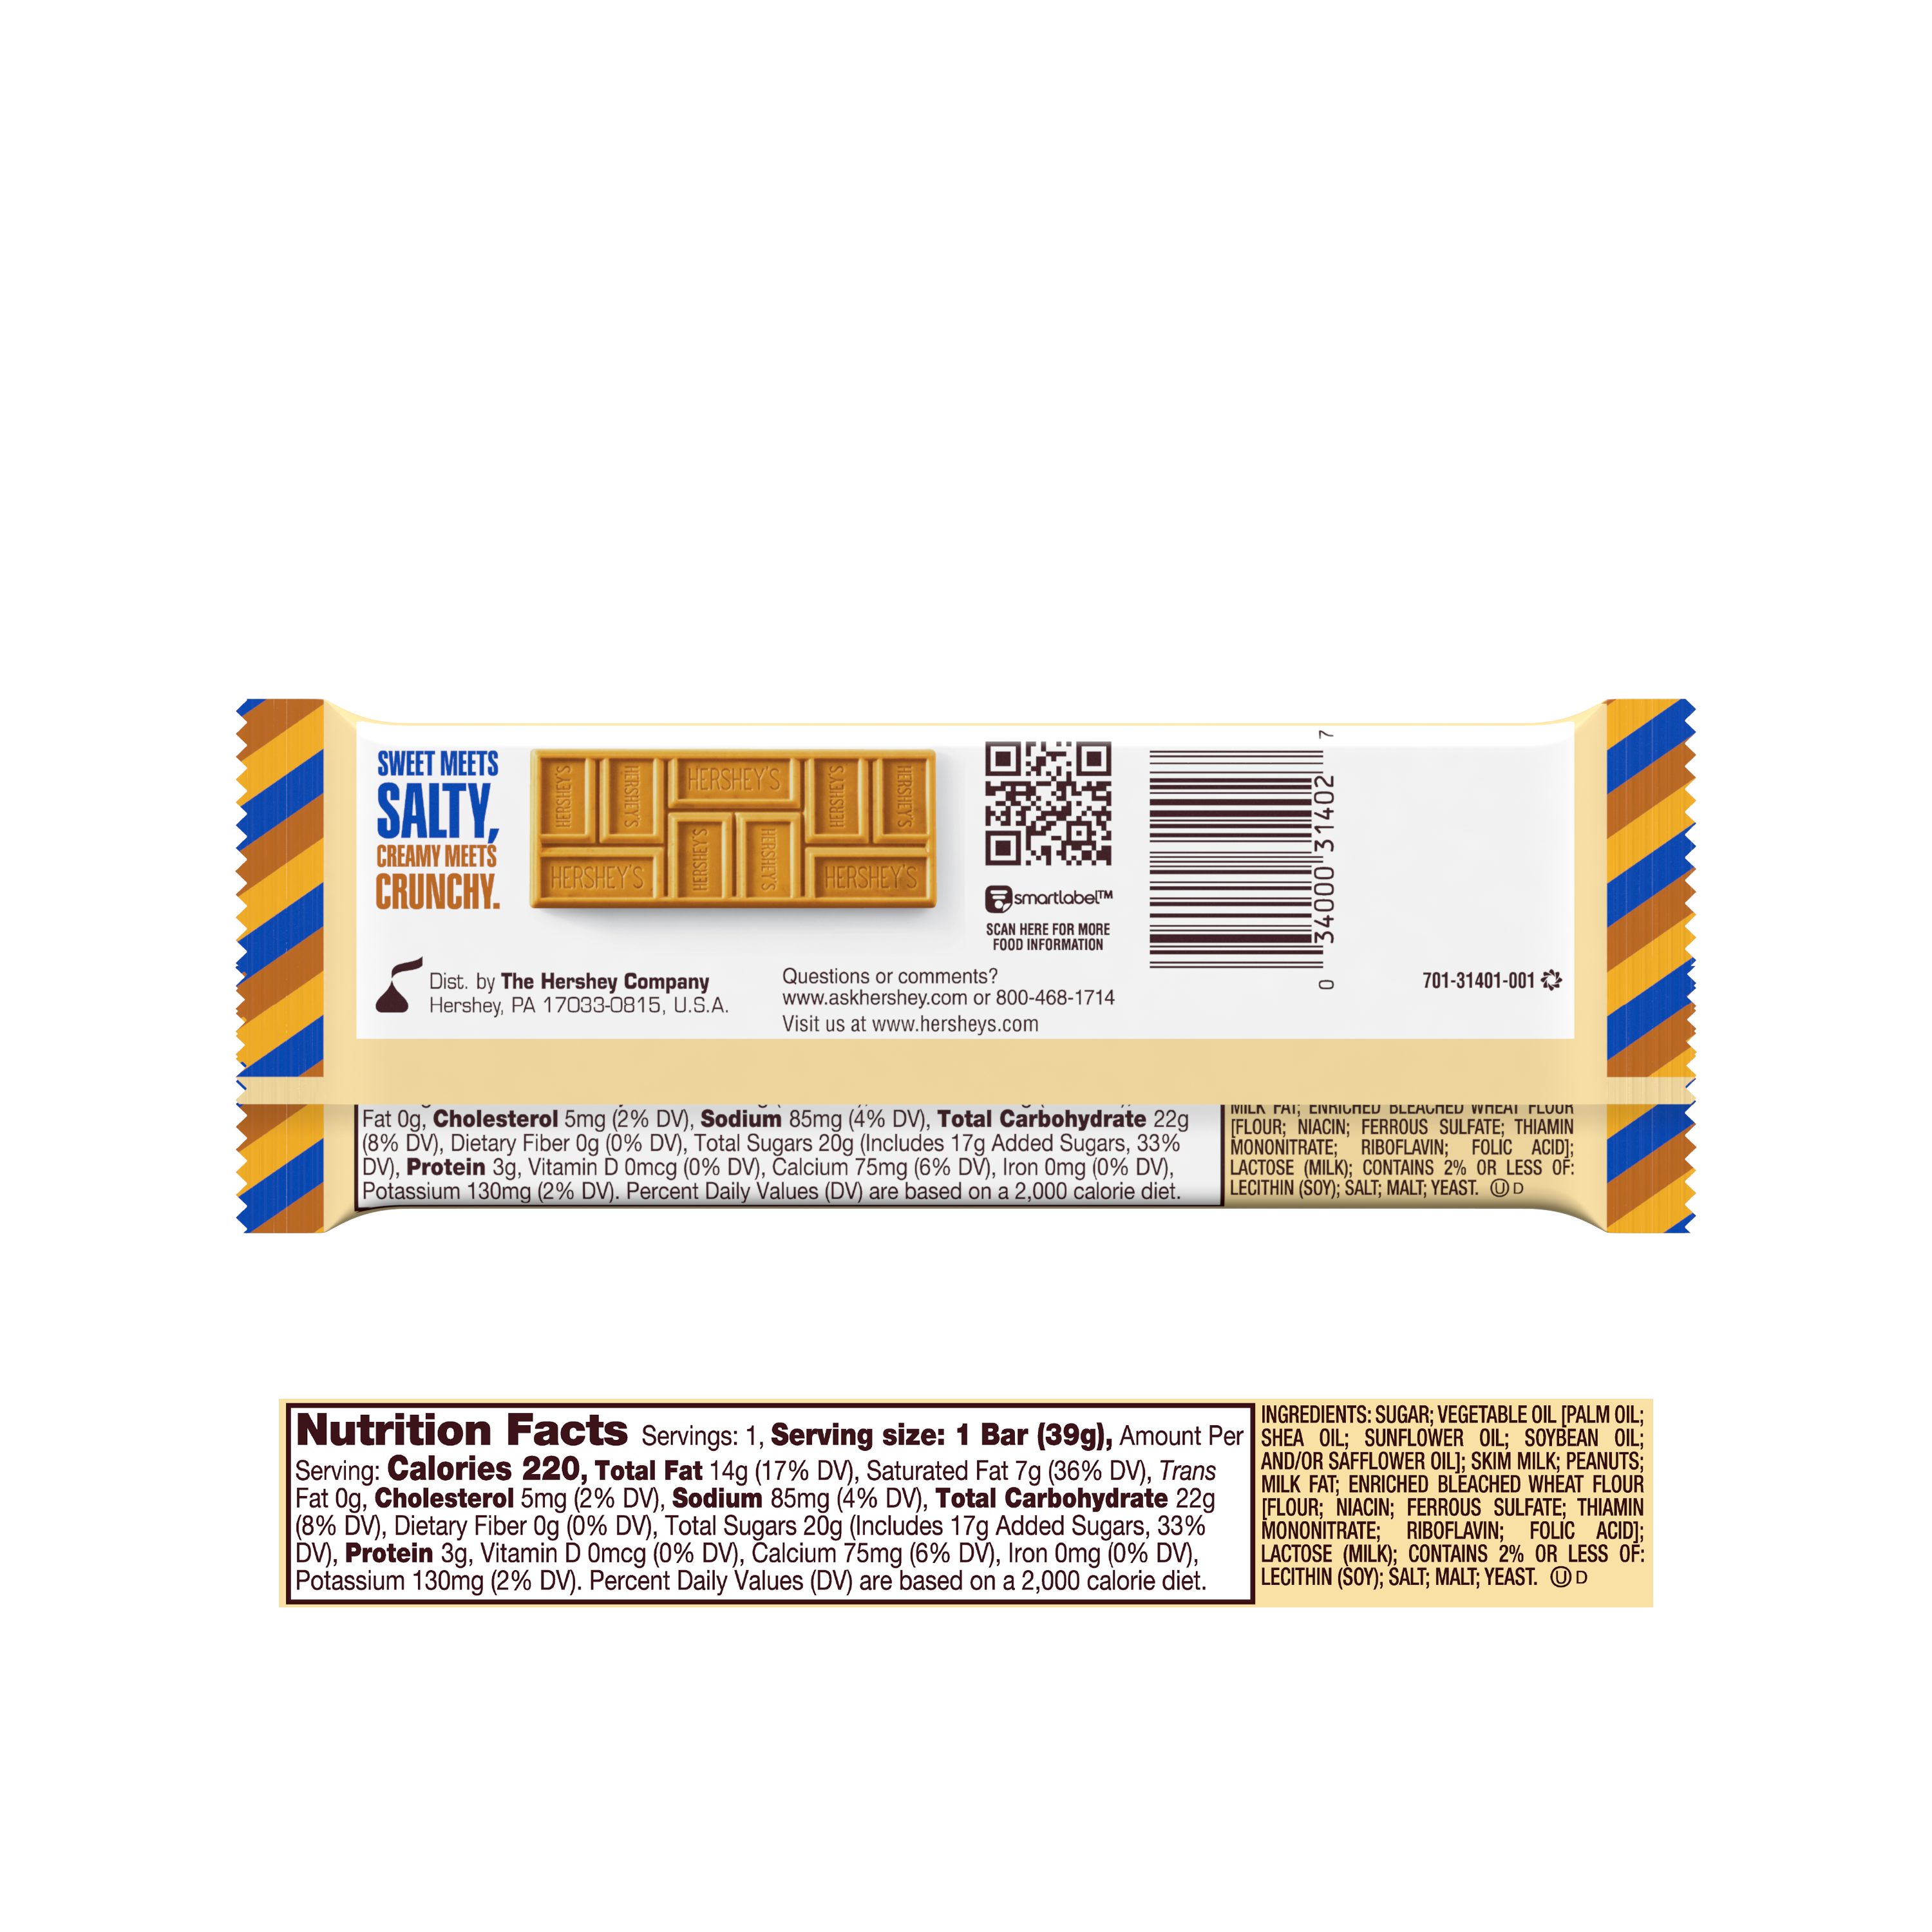 HERSHEY'S GOLD Peanuts & Pretzels in Caramelized Creme Candy Bar, 1.4 oz - Back of Package